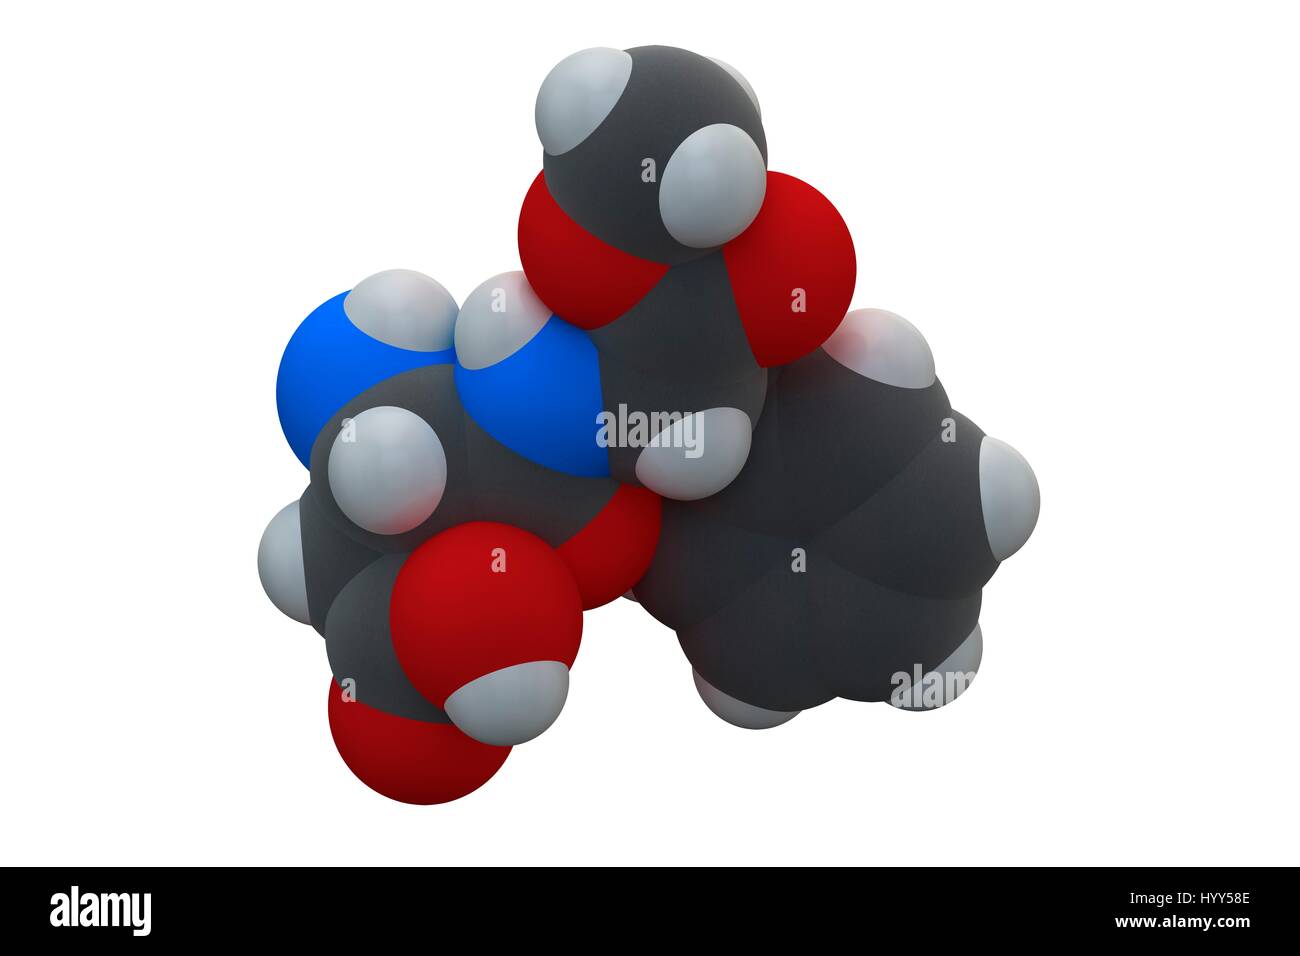 Aspartame artificial sweetener molecule (sugar substitute). Chemical formula is C14H18N2O5. Atoms are represented as spheres: carbon (grey), hydrogen (white), nitrogen (blue), oxygen (red). Illustration. Stock Photo